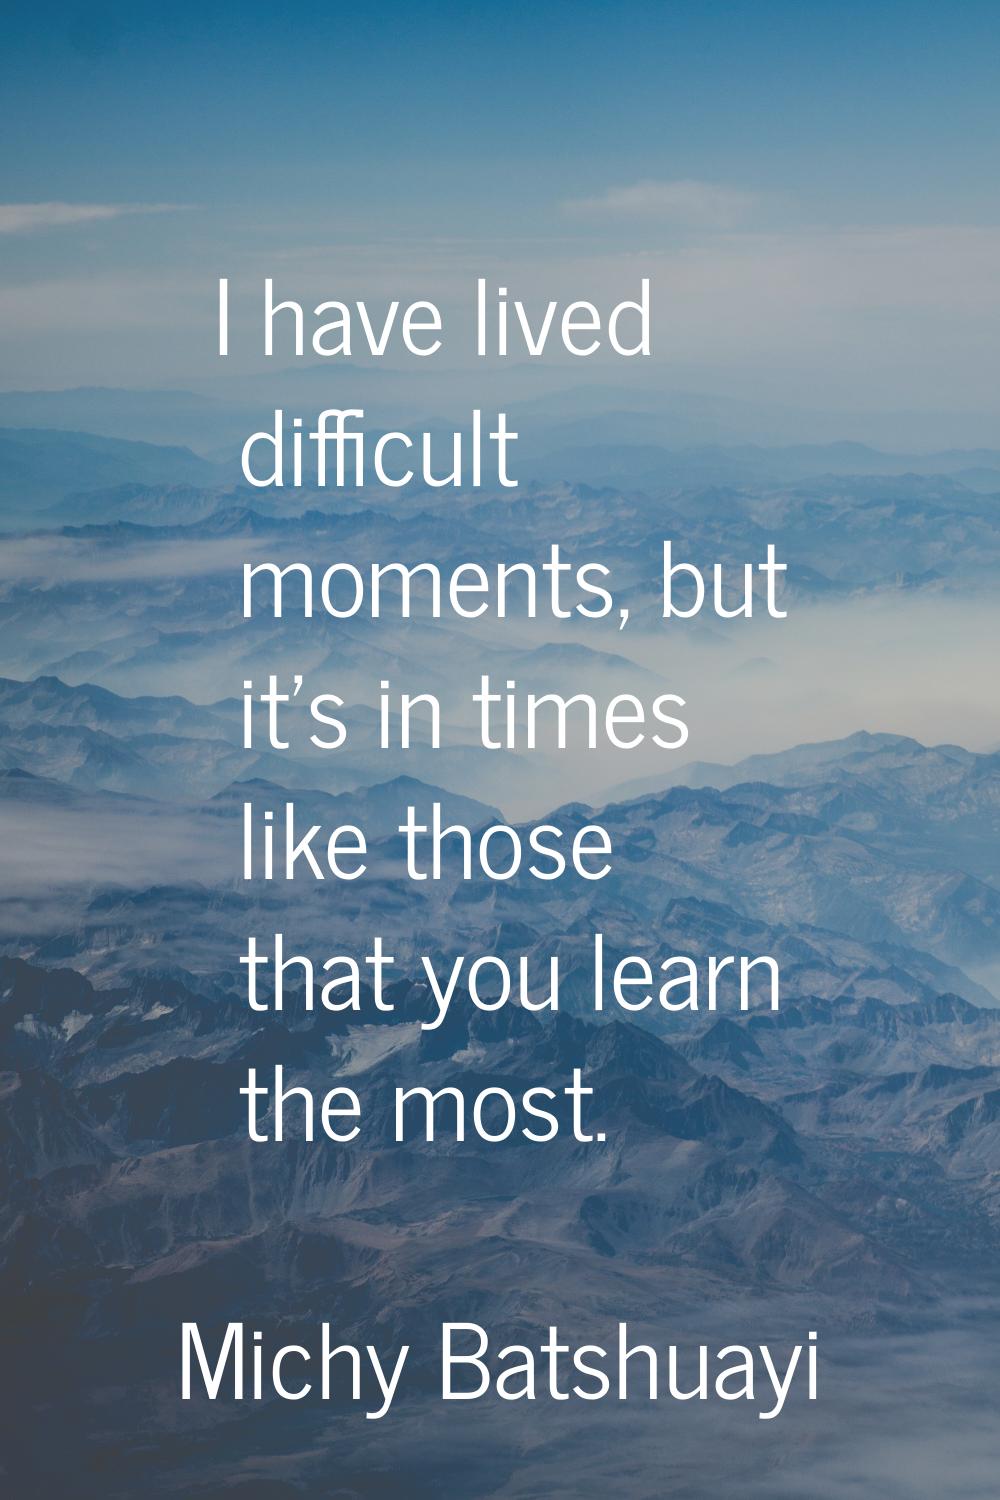 I have lived difficult moments, but it's in times like those that you learn the most.